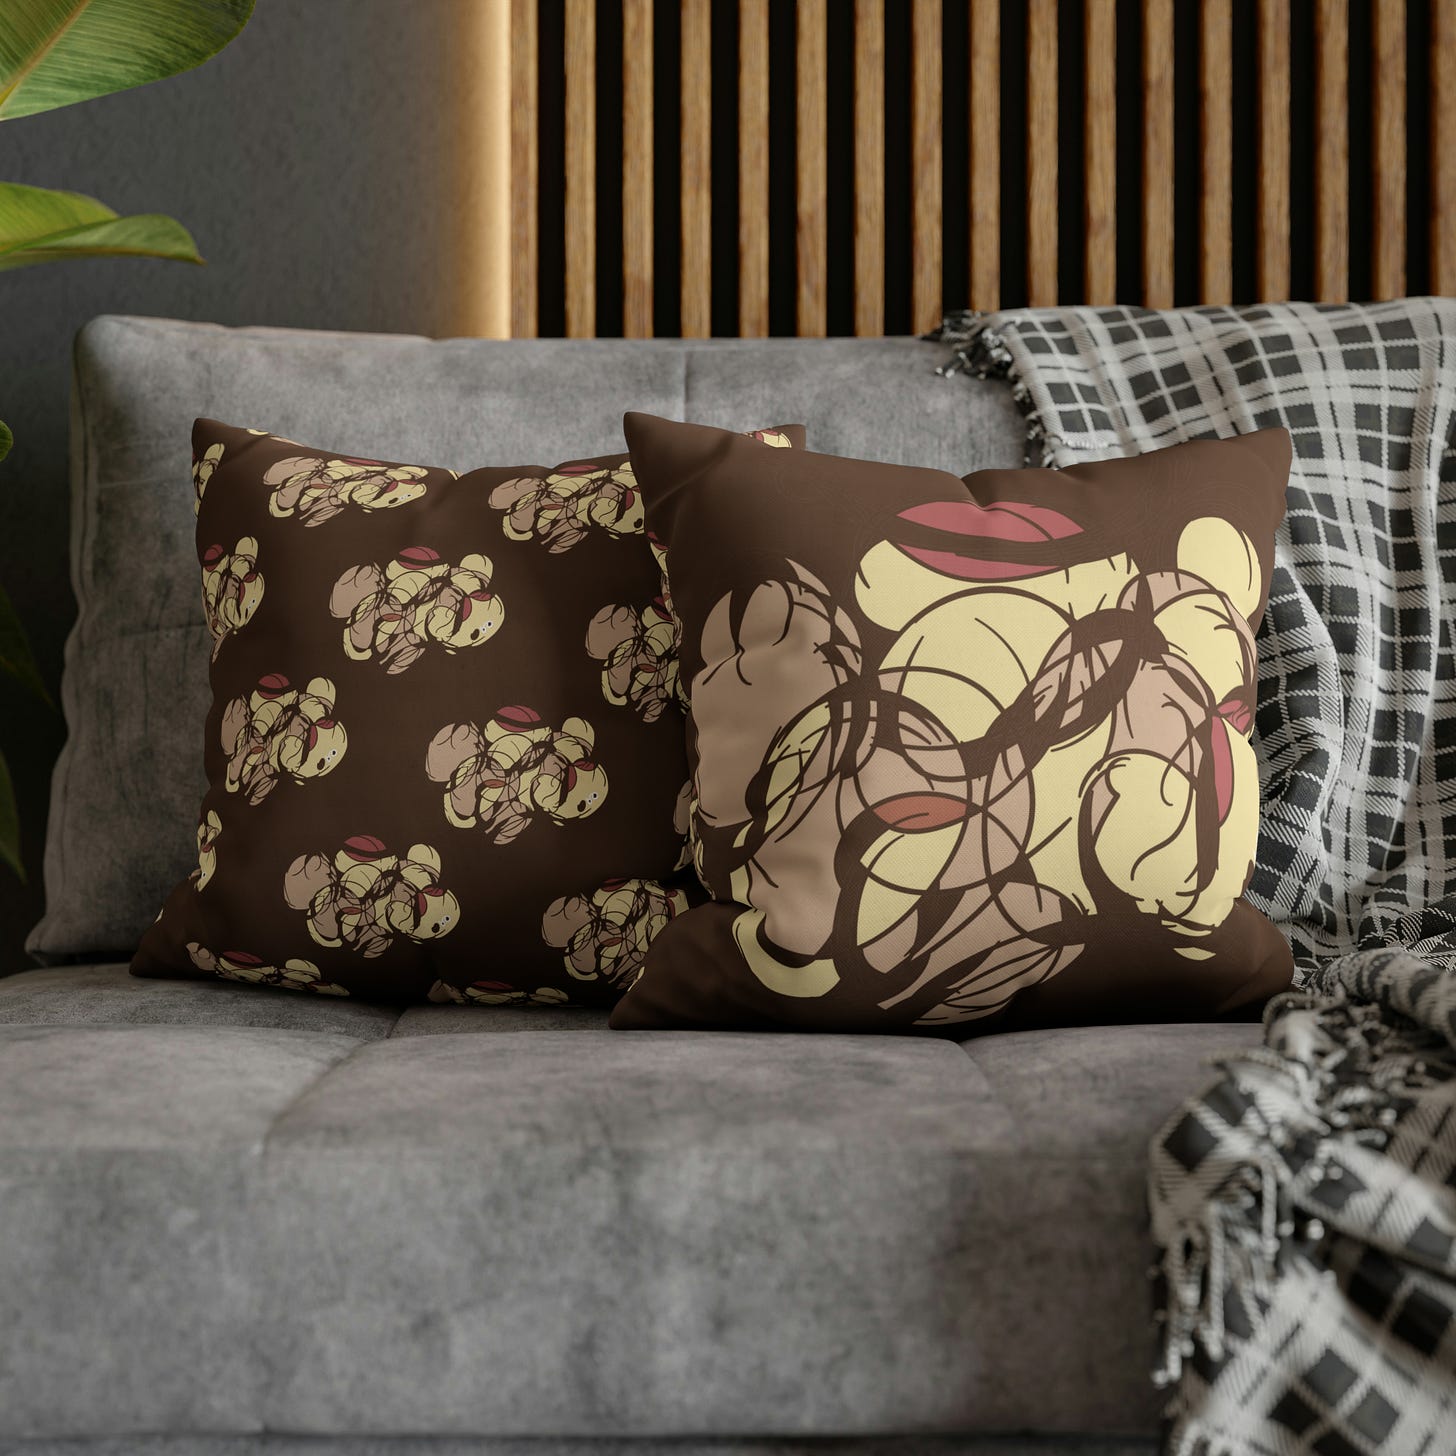 Breezy Drift Pillow Case by Northinwdillustrations